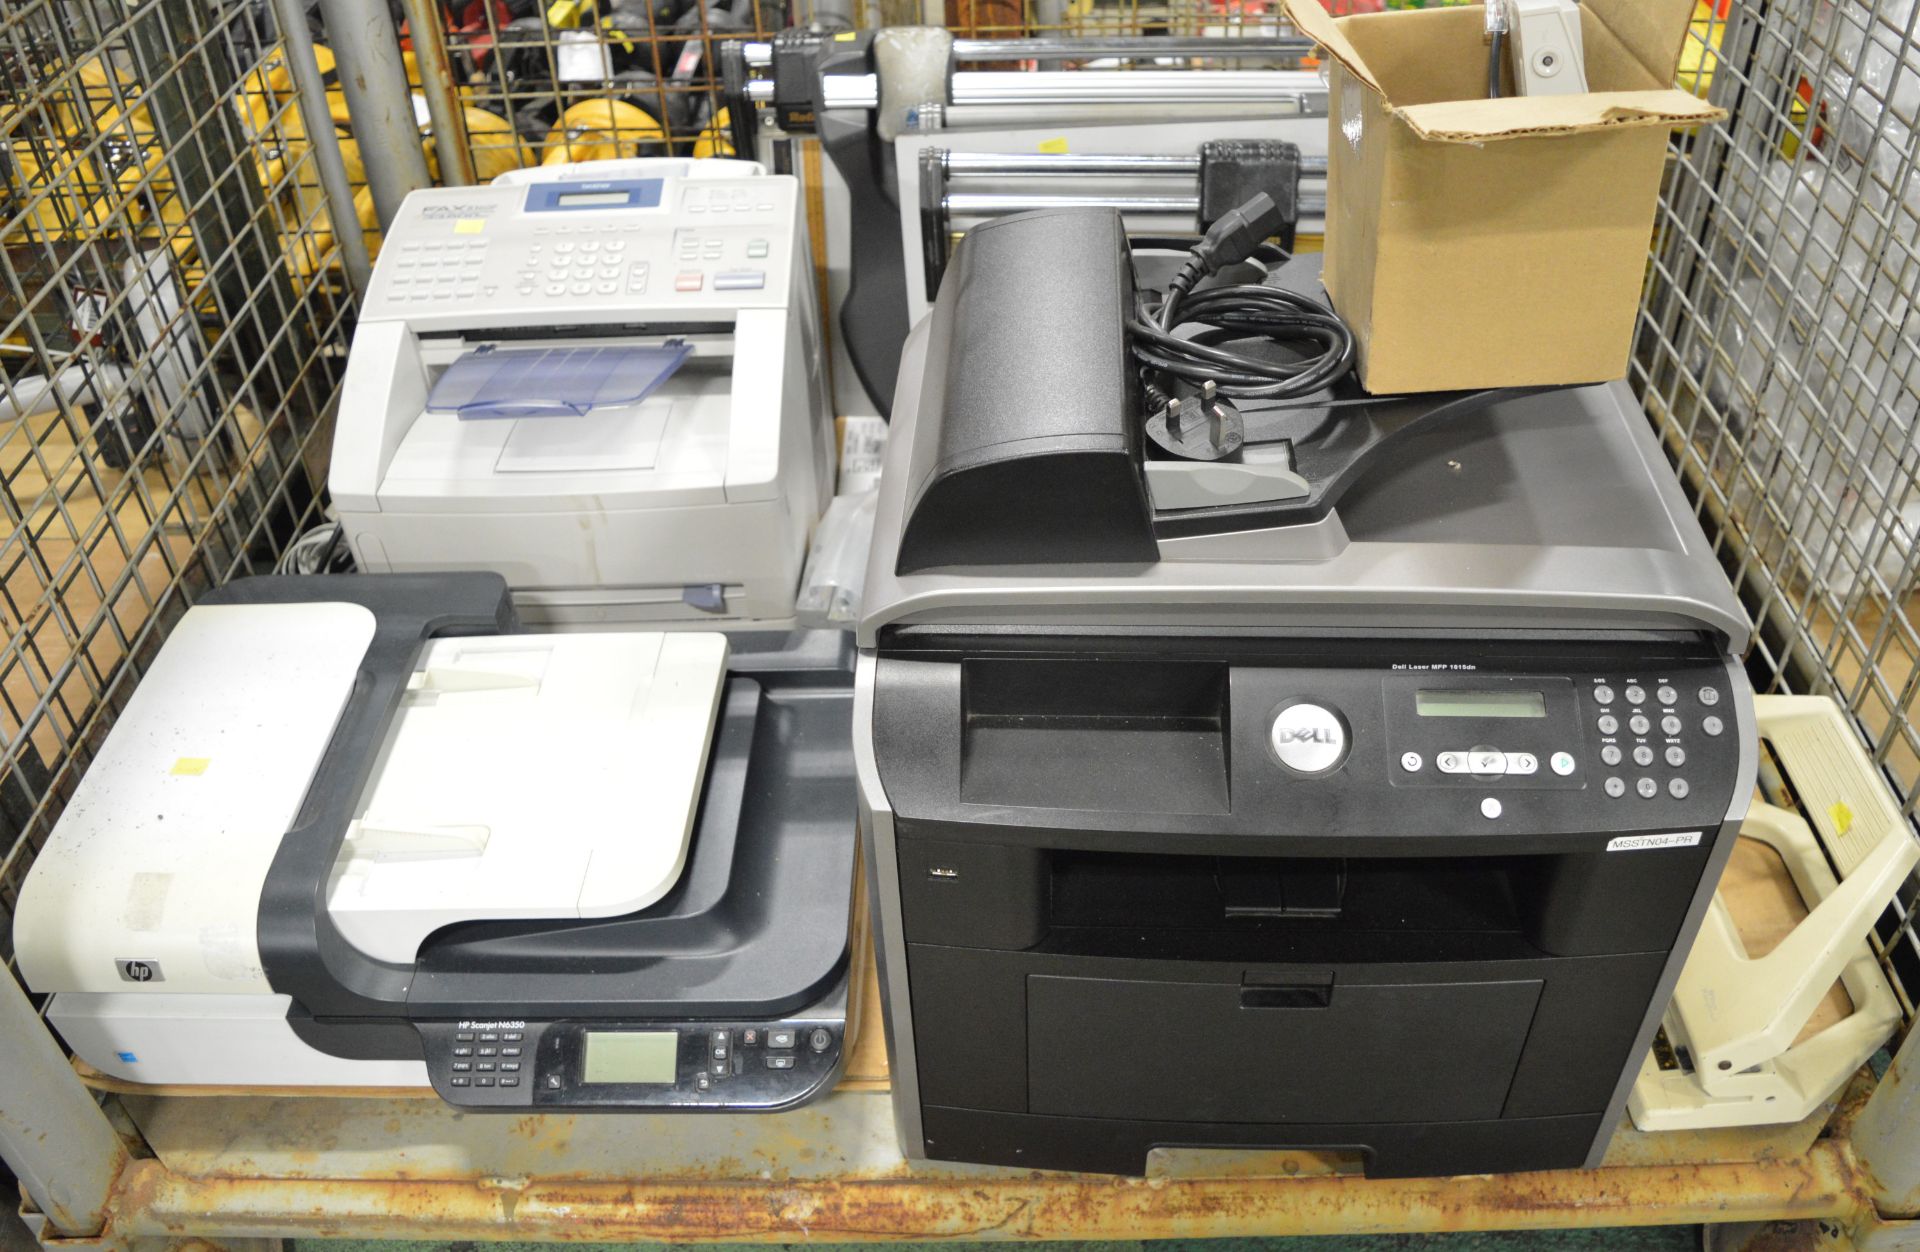 Dell Laser MFP 1815dn, Brother Fax 8360P, HP Scanjet N6350, Cutting Boards. - Image 2 of 2